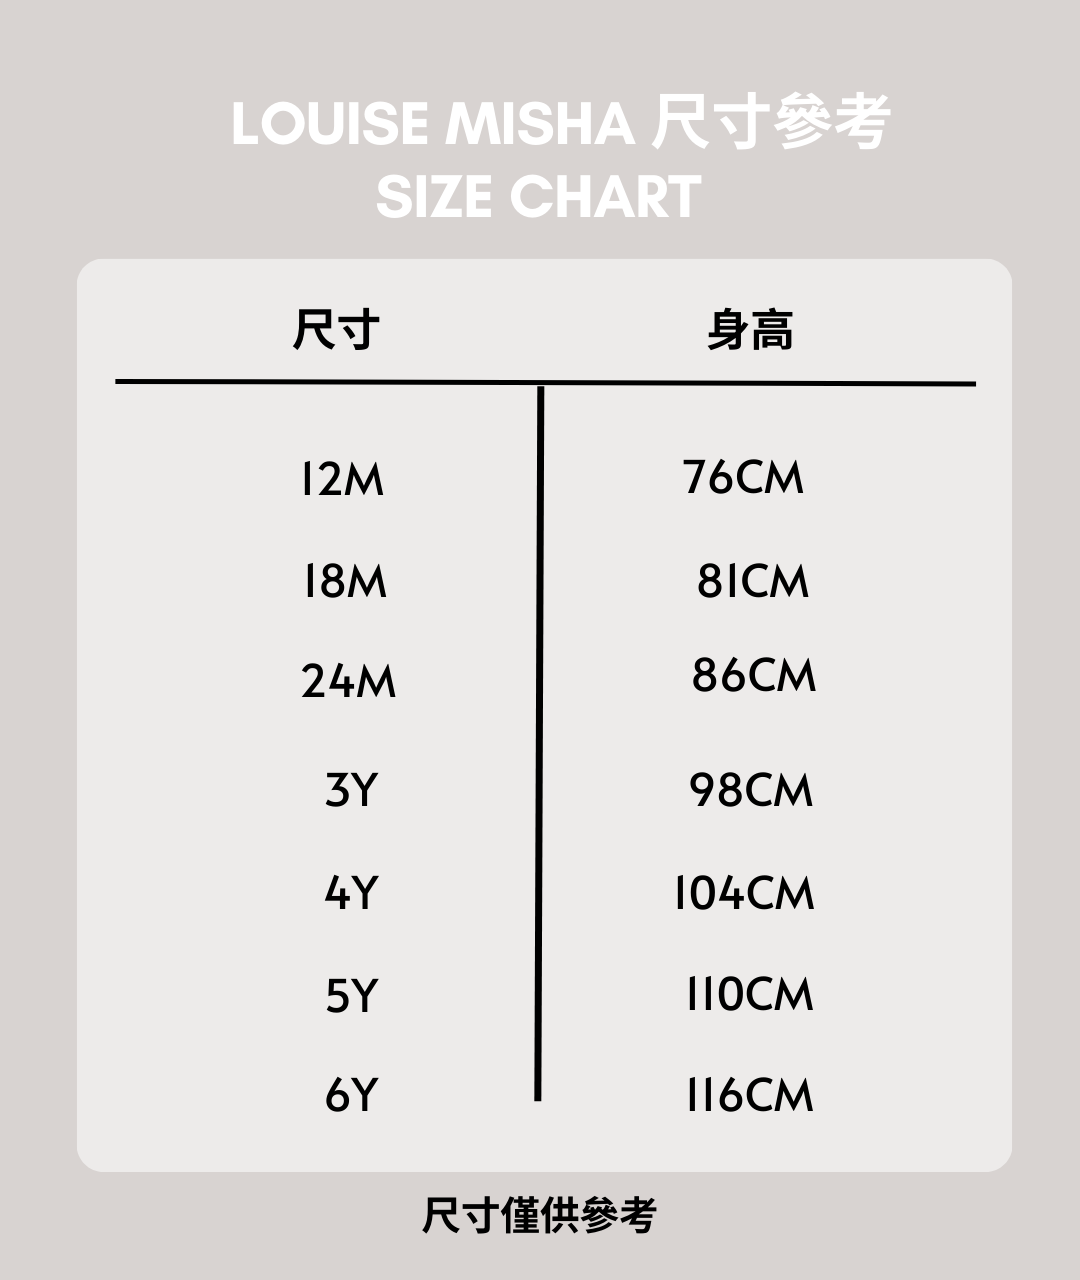 LM size